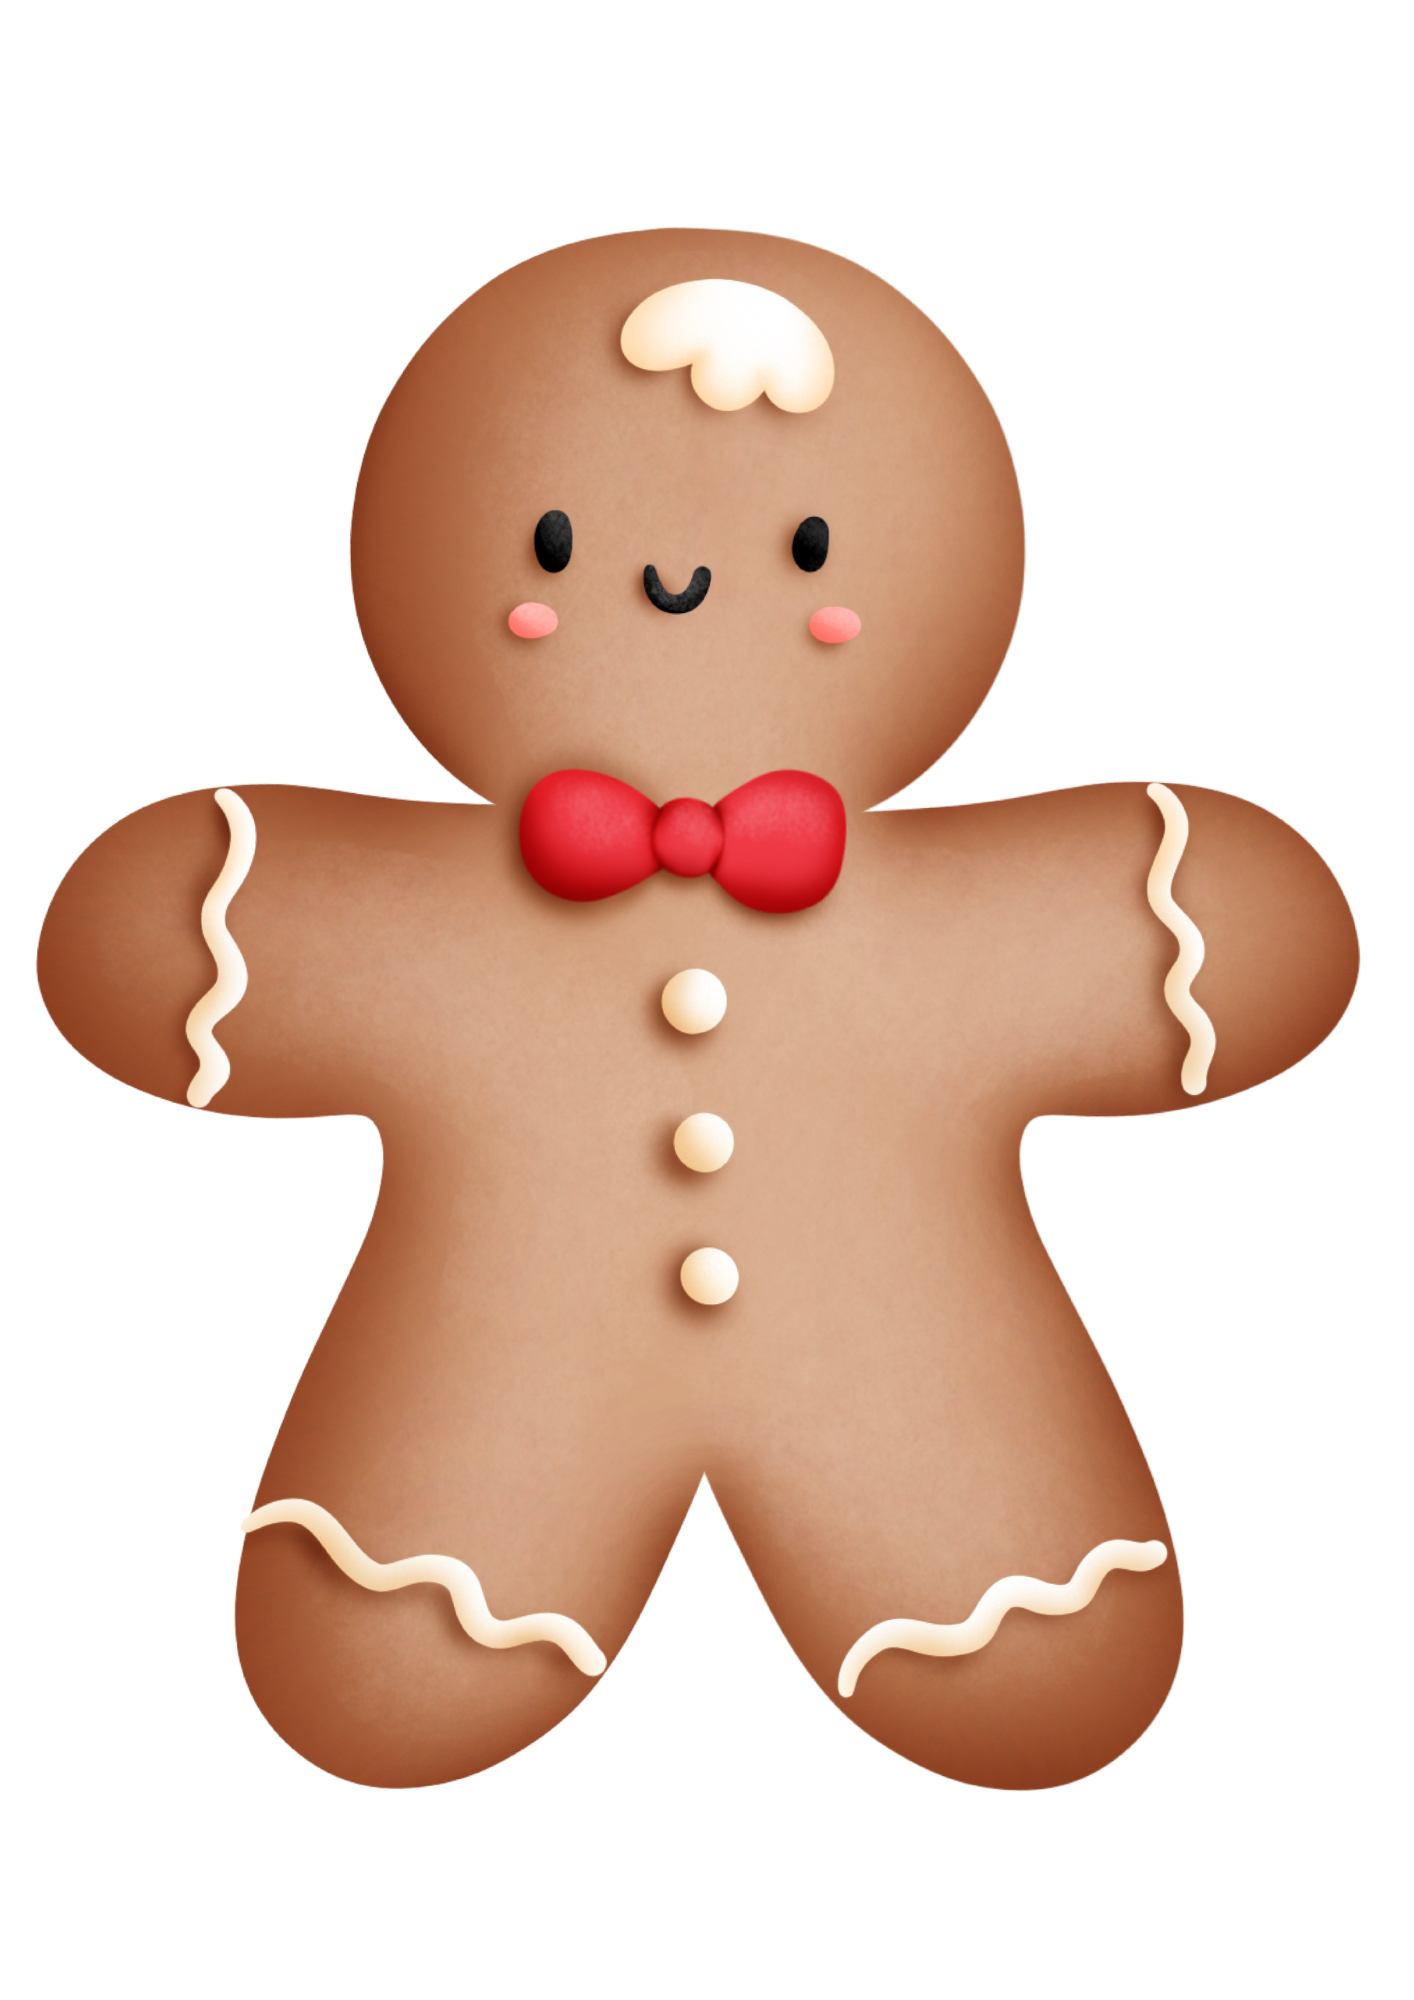 gingerbread person